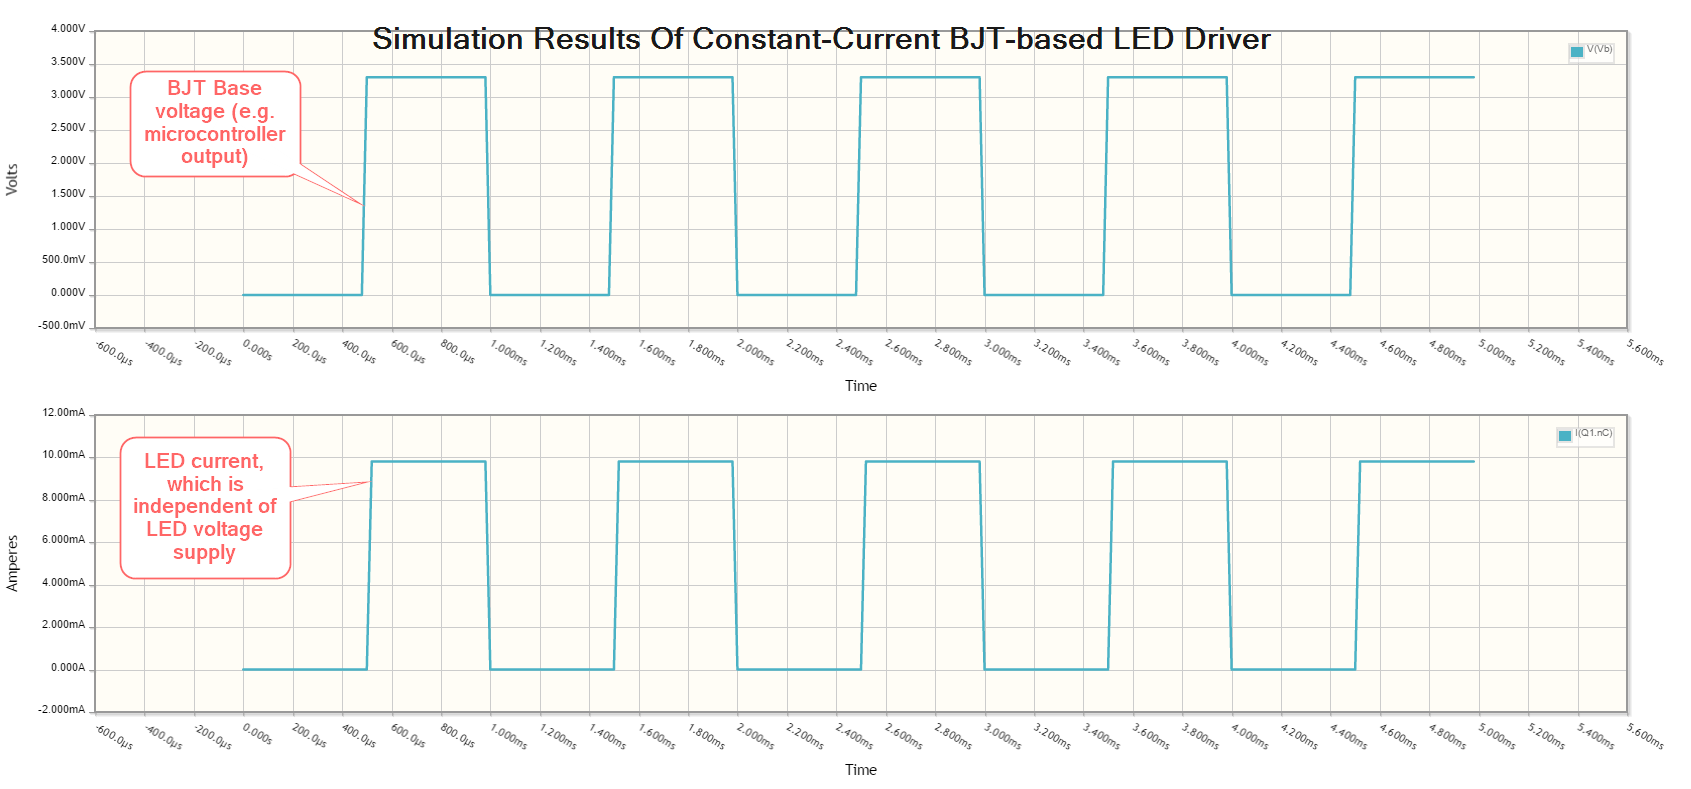 The simulation results of a constant-current BJT-based LED driver.